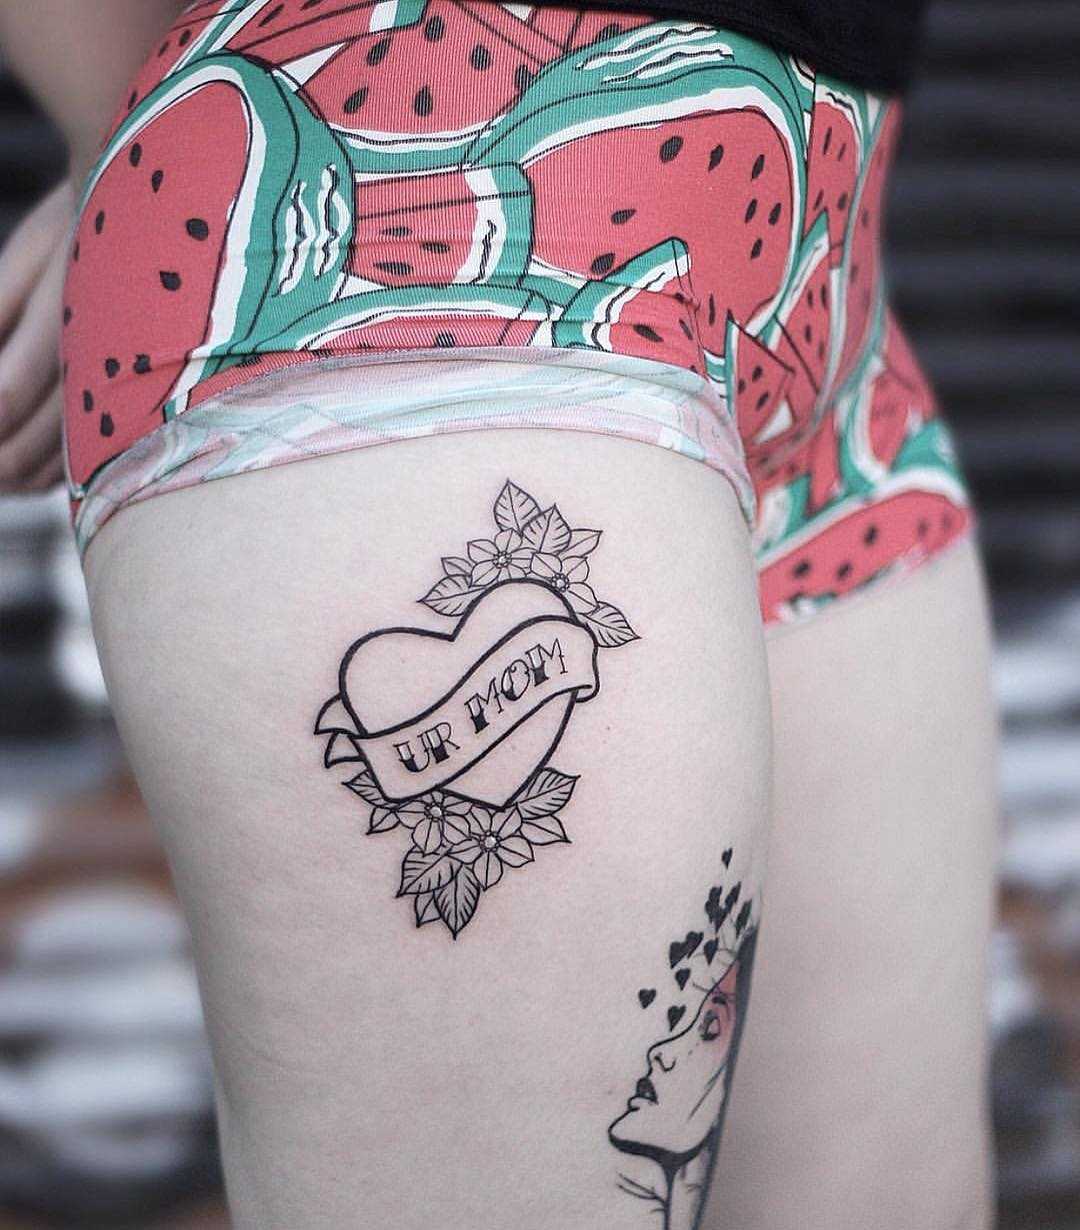 Heart and script tattoo by Alex at Golden Iron Studio